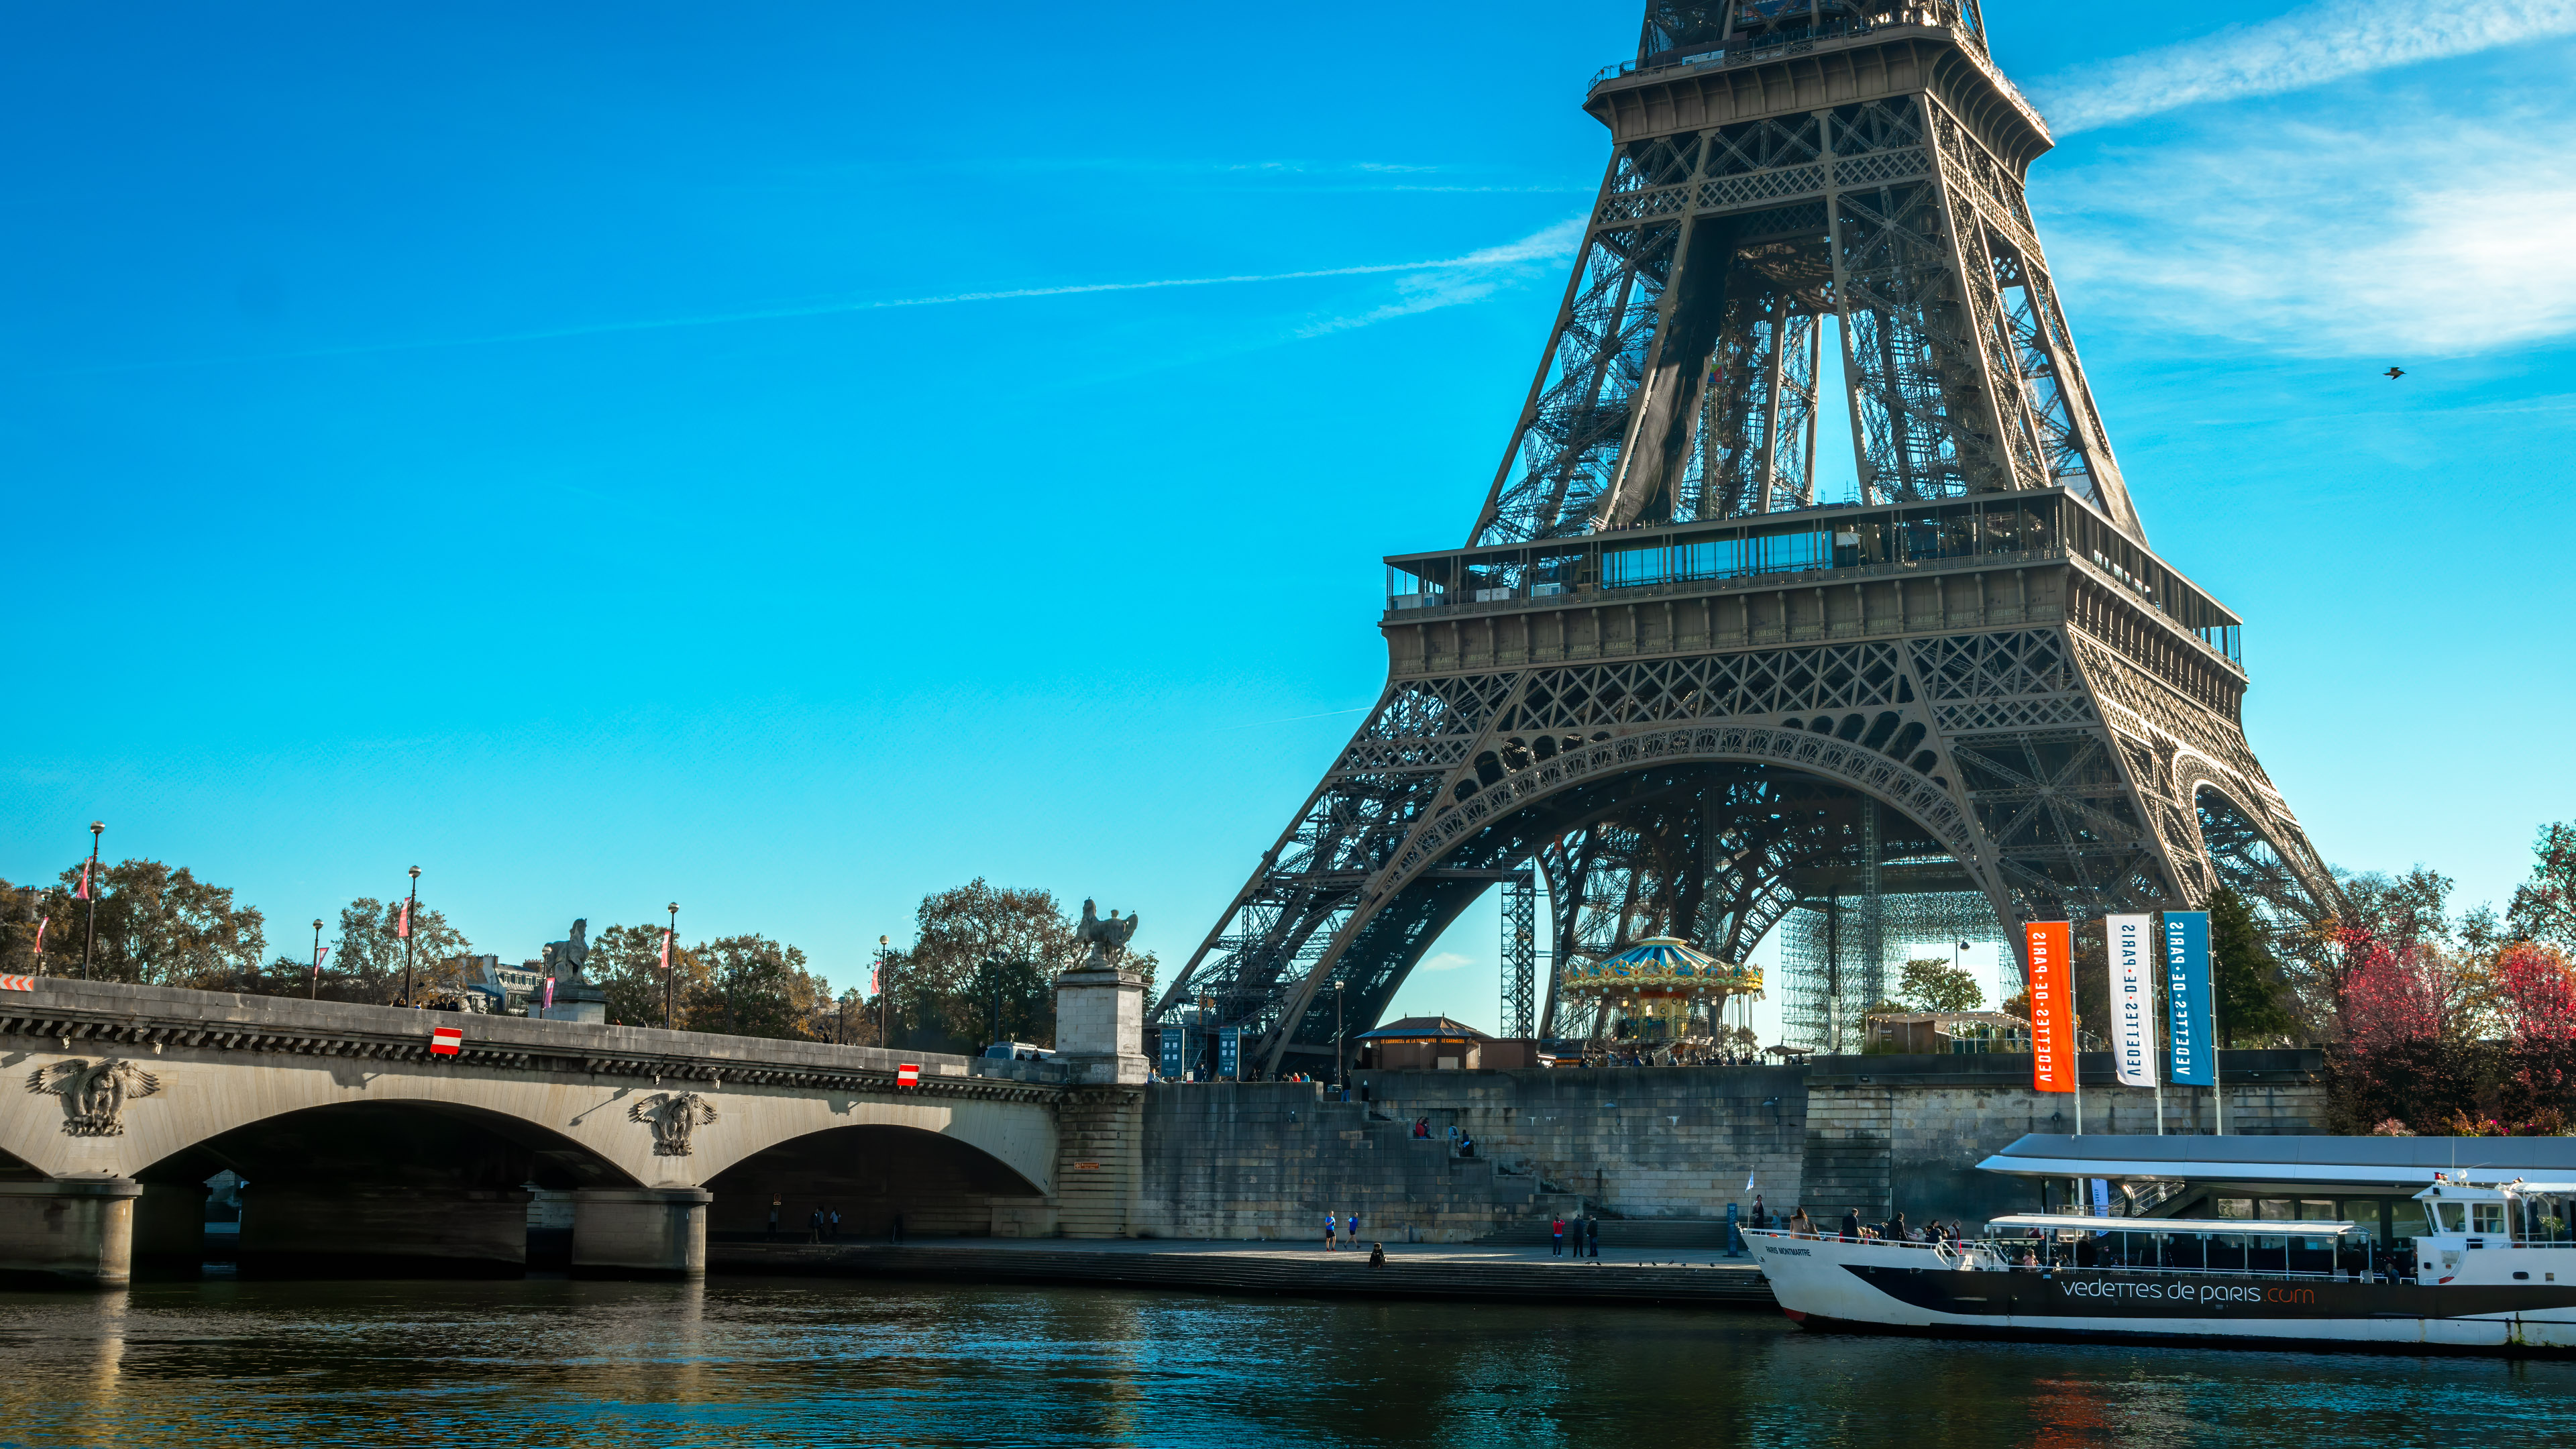 Bring the charm of Paris to your screen with our free 4K wallpaper showcasing the iconic Eiffel Tower.